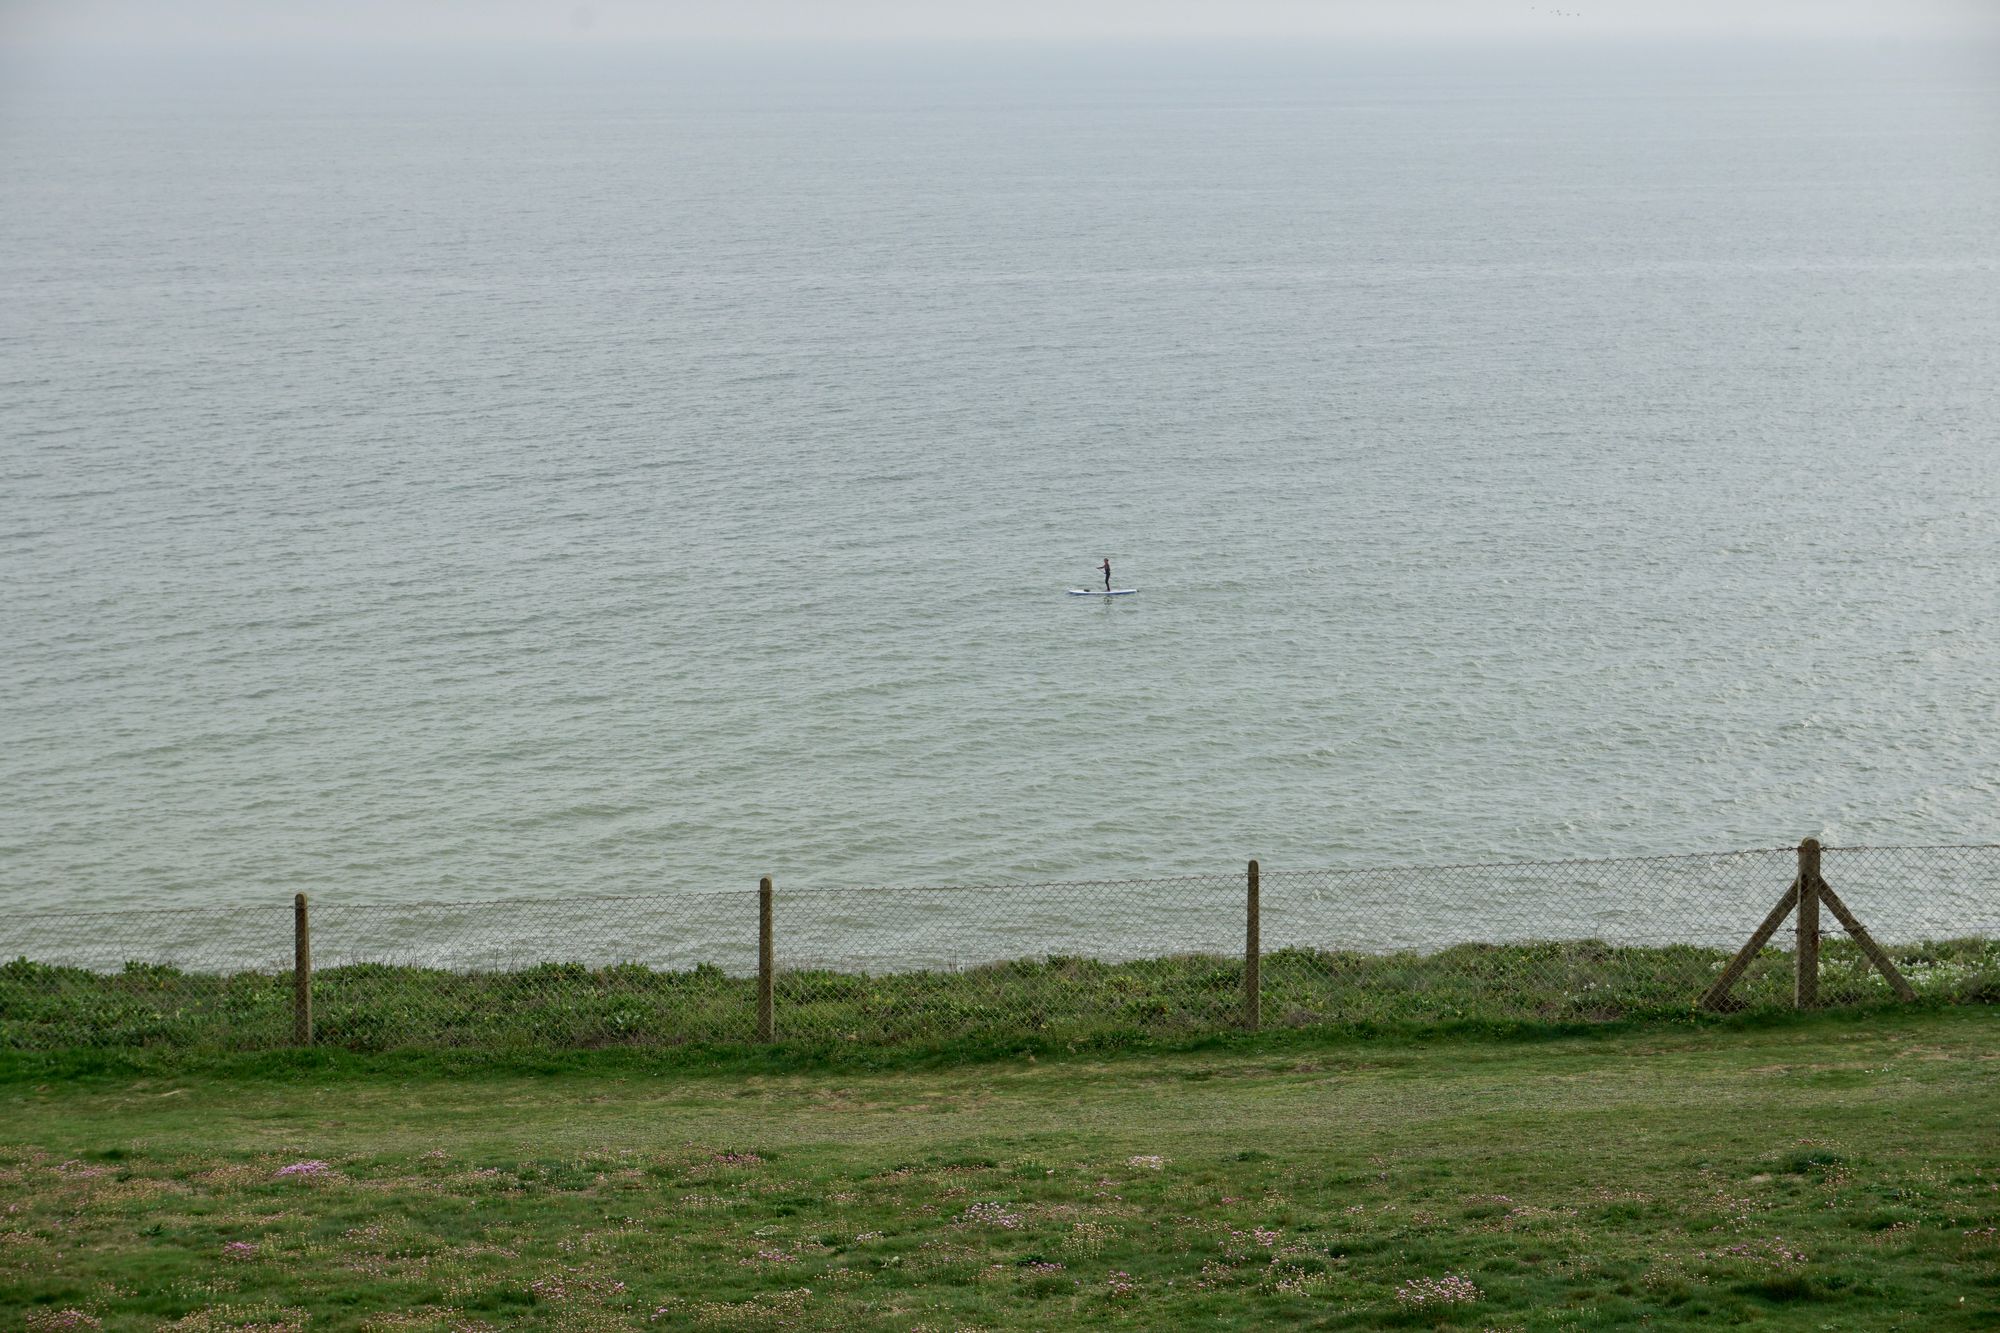 Looking over the edge of the cliff towards the sea. A paddleboarder is visible a good distance out to sea.